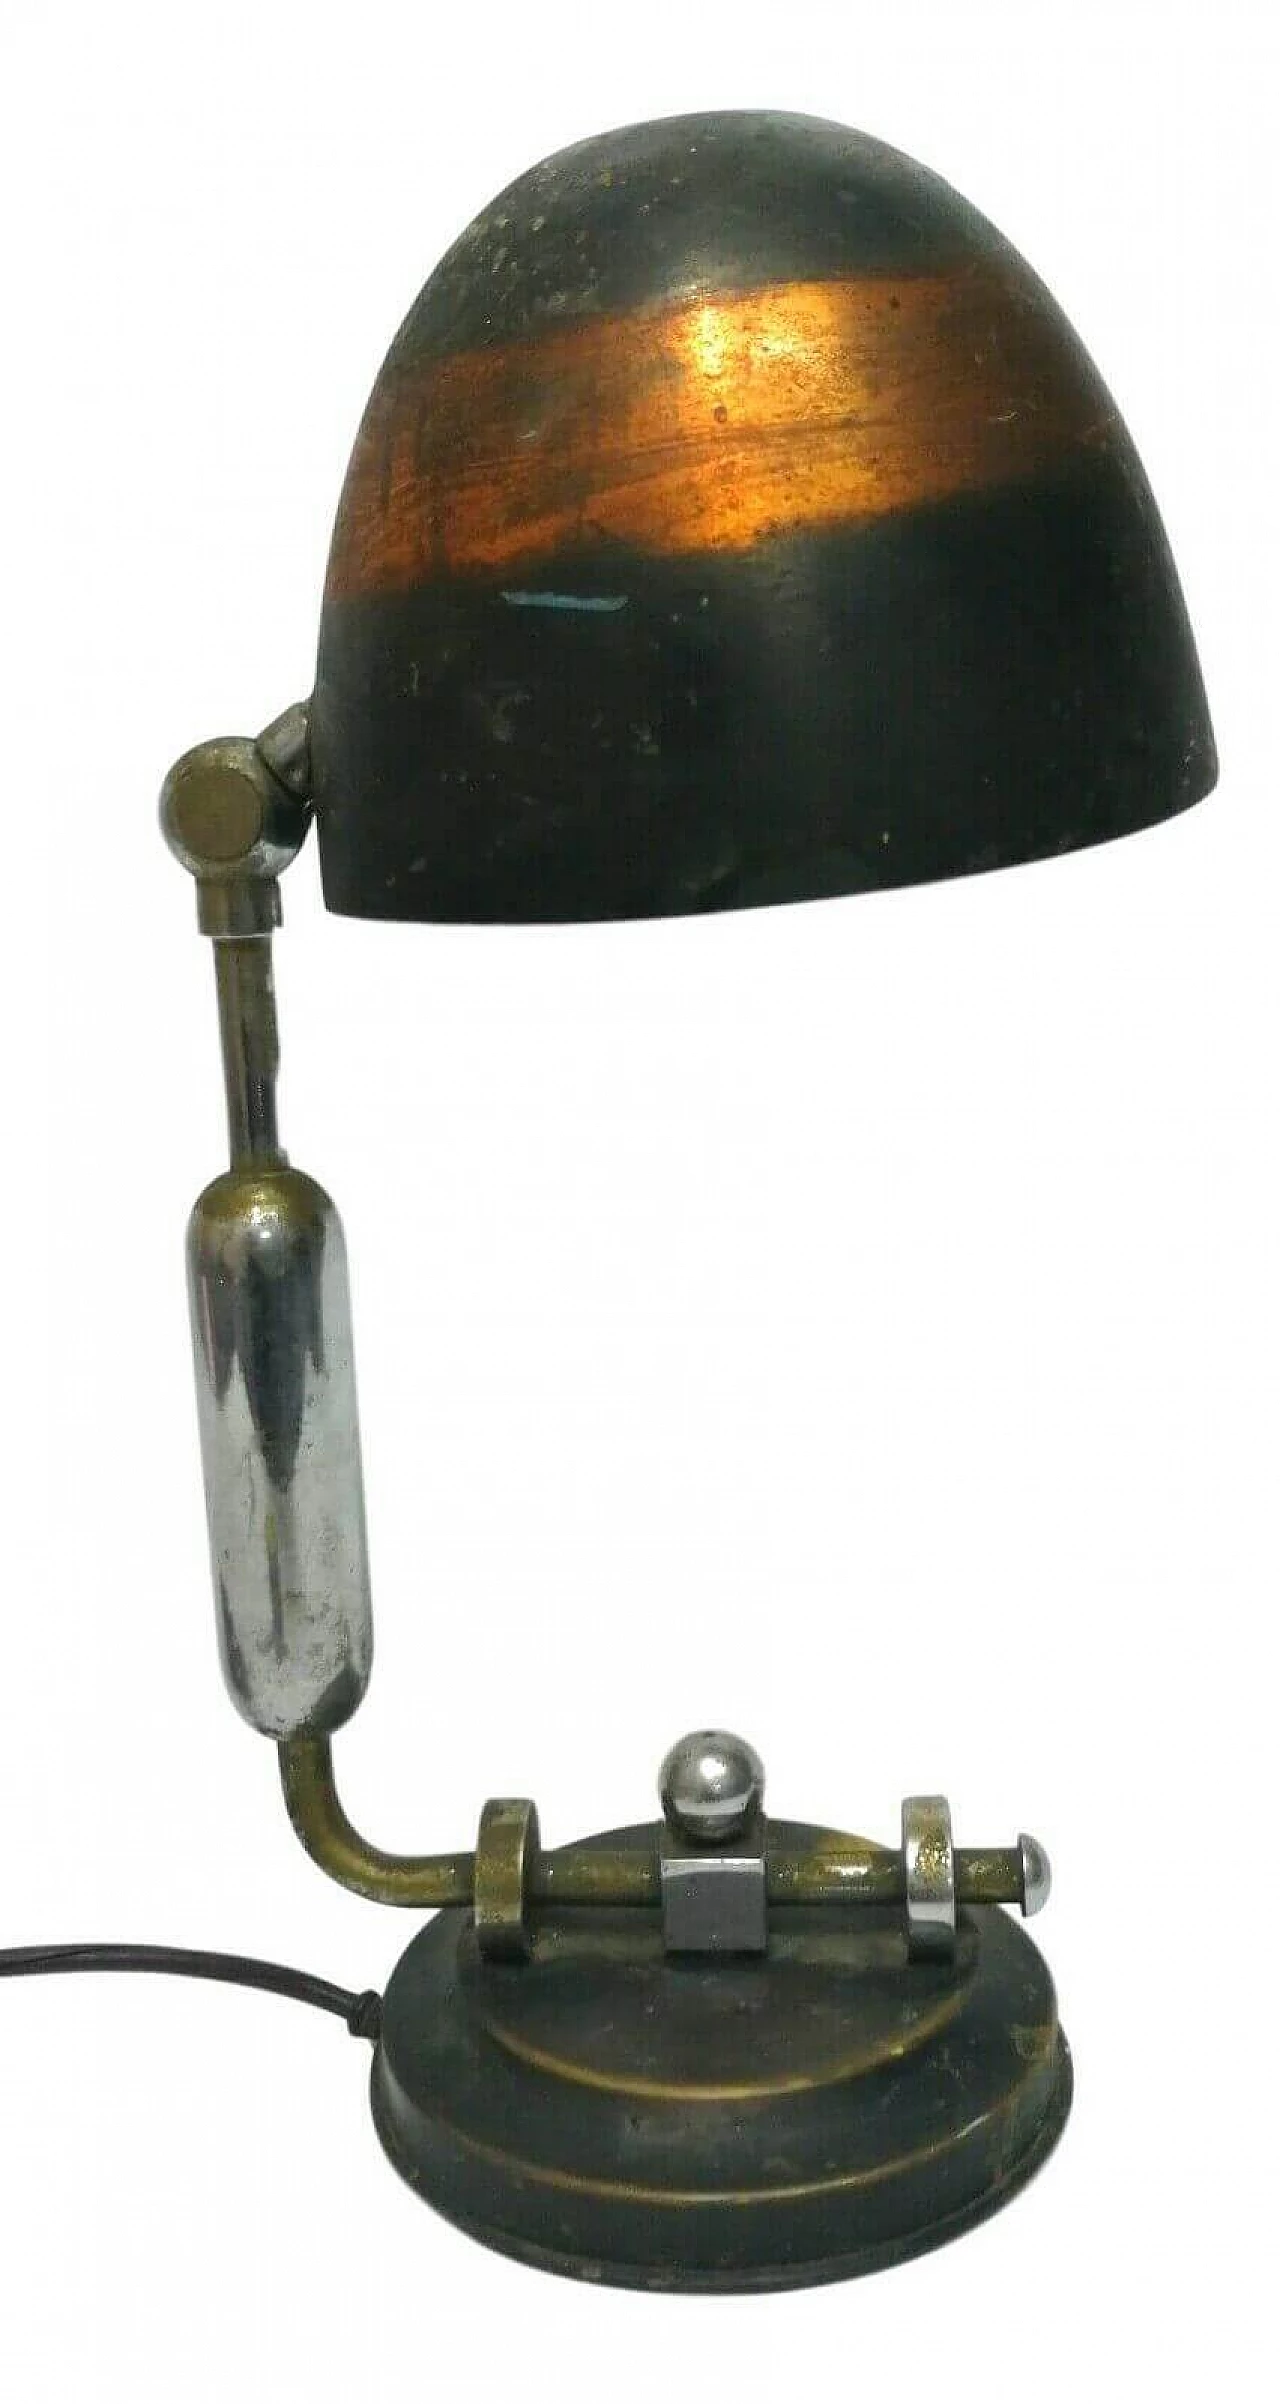 Bauhaus industrial table lamp by Anker Lyhne, 1950s 1163920